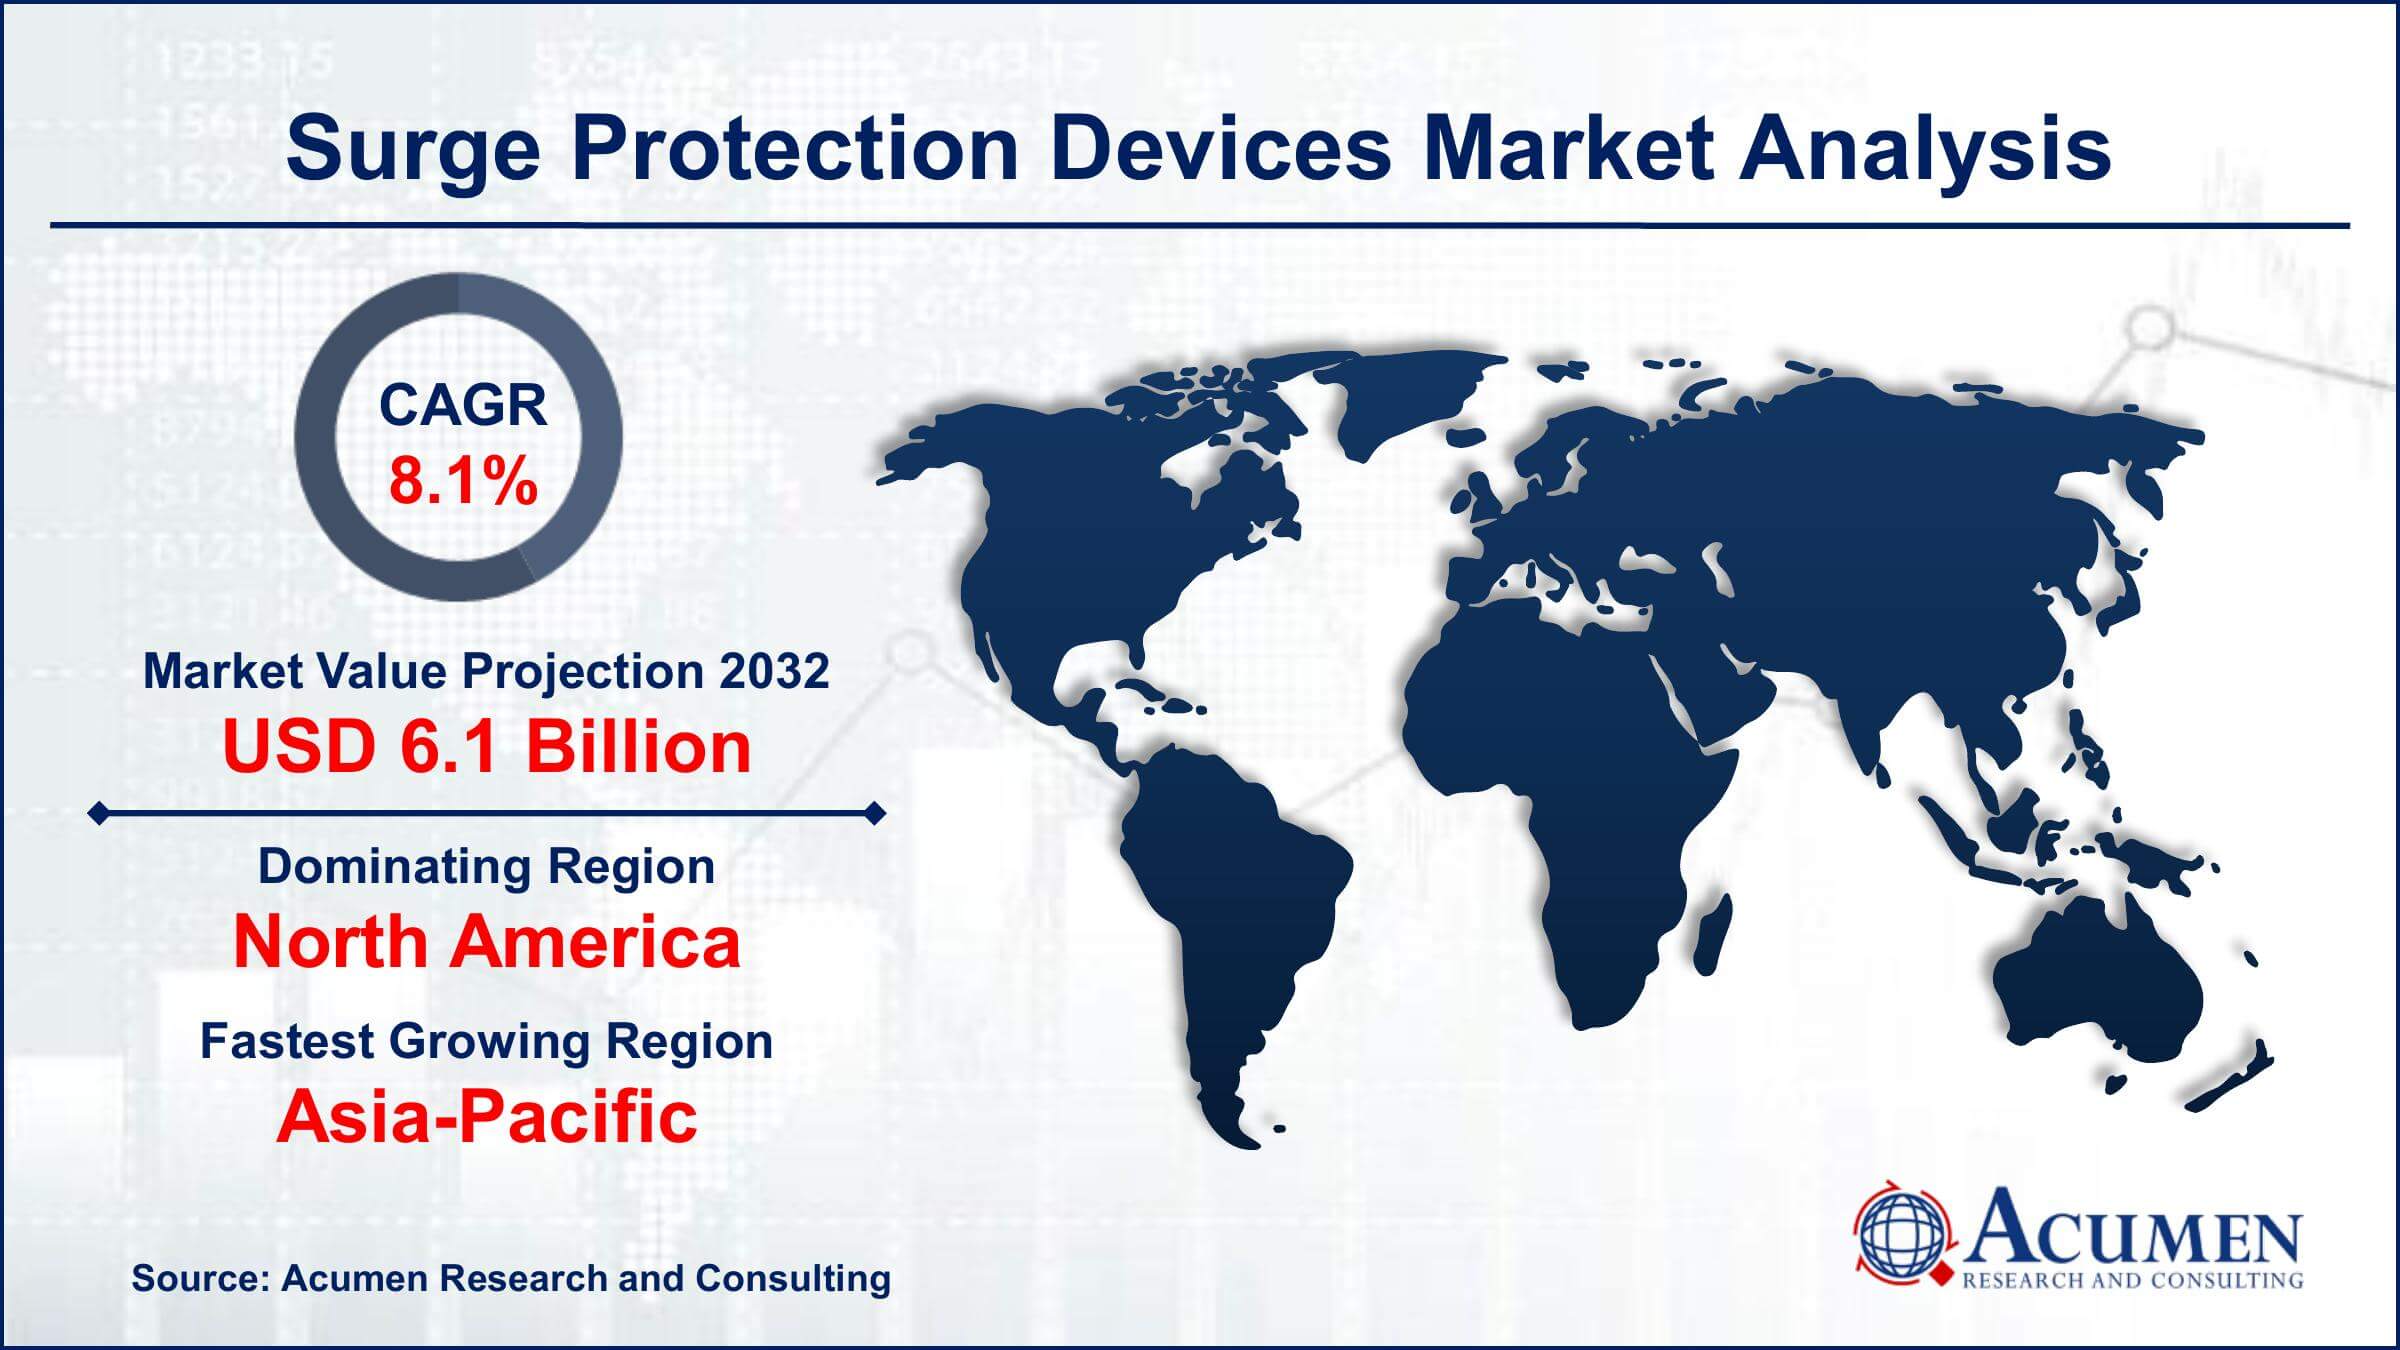 Global Surge Protection Devices Market Trends